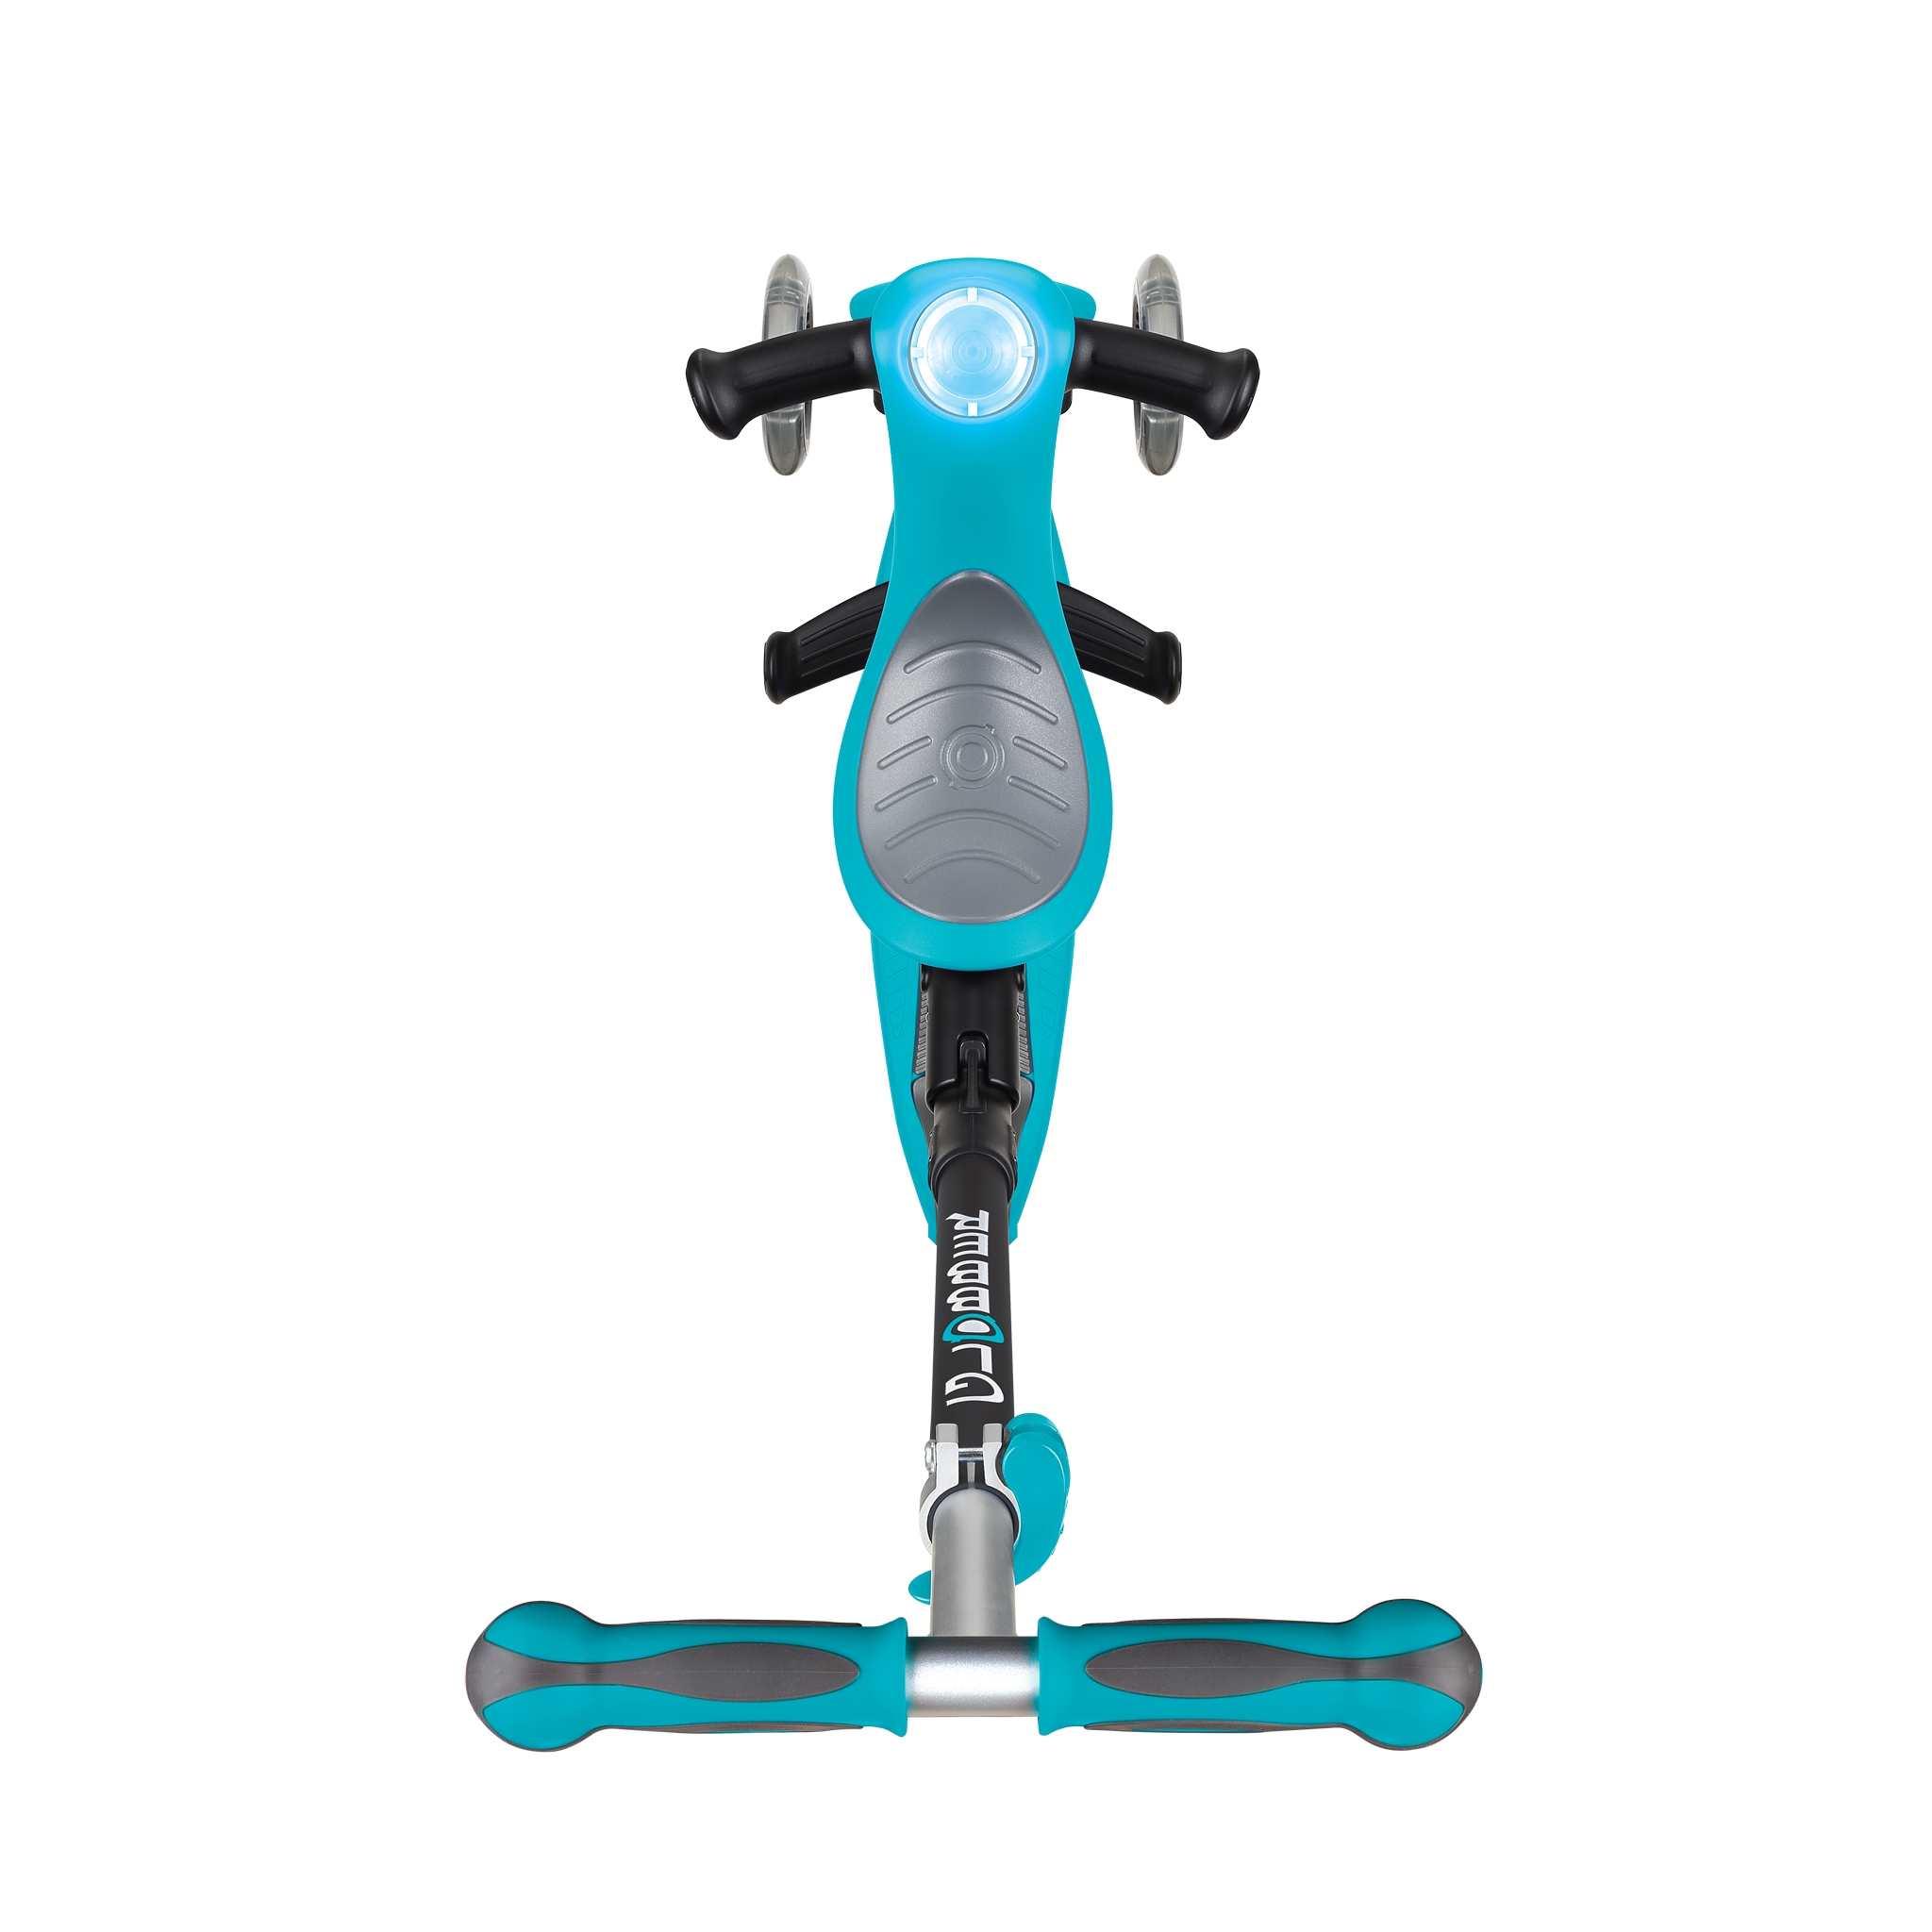 GO-UP-DELUXE-PLAY-ride-on-walking-bike-scooter-with-light-and-sound-module-and-extra-wide-3-height-adjustable-seat-teal 2